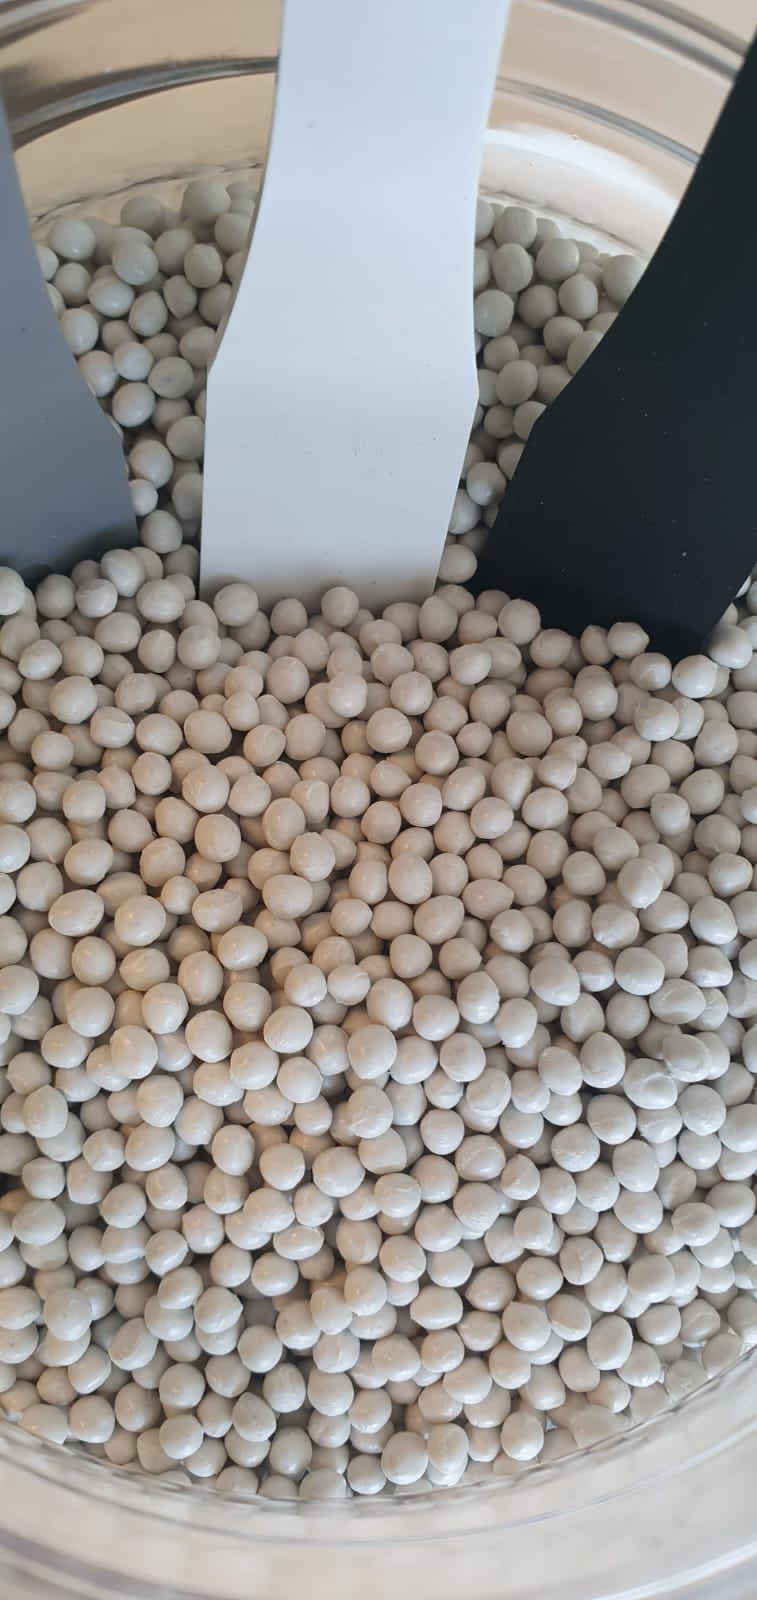 High Impact Polystyrene - PS Regranulate  suppliers